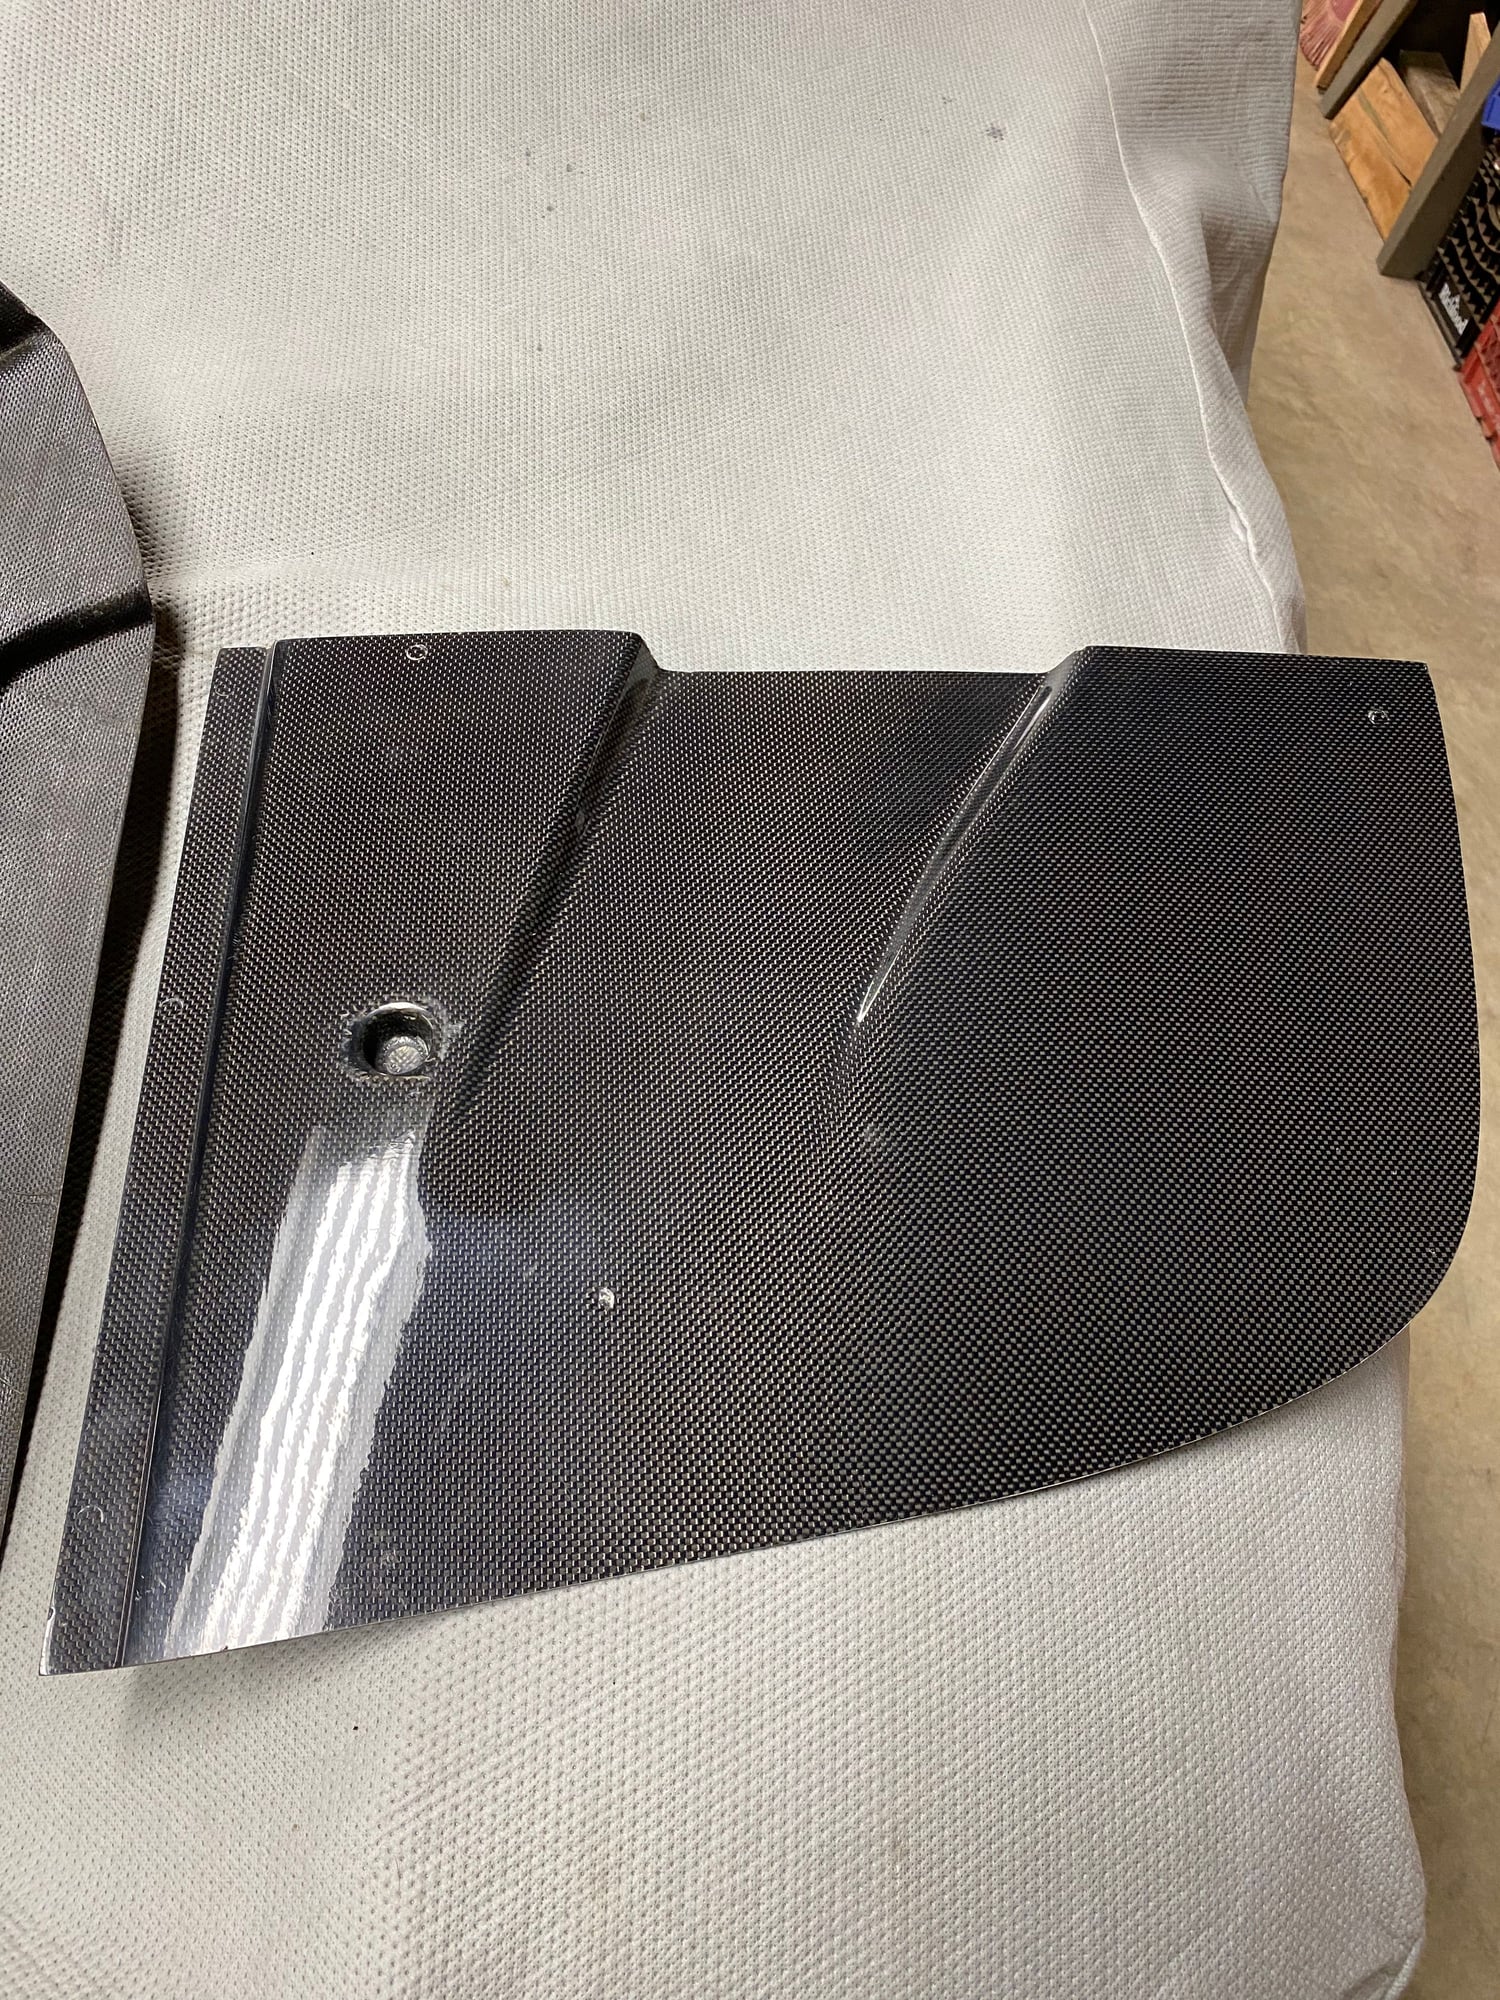 Accessories - Shine Auto carbon Undertray - New - 1992 to 2002 Mazda RX-7 - Millersville, MD 21108, United States